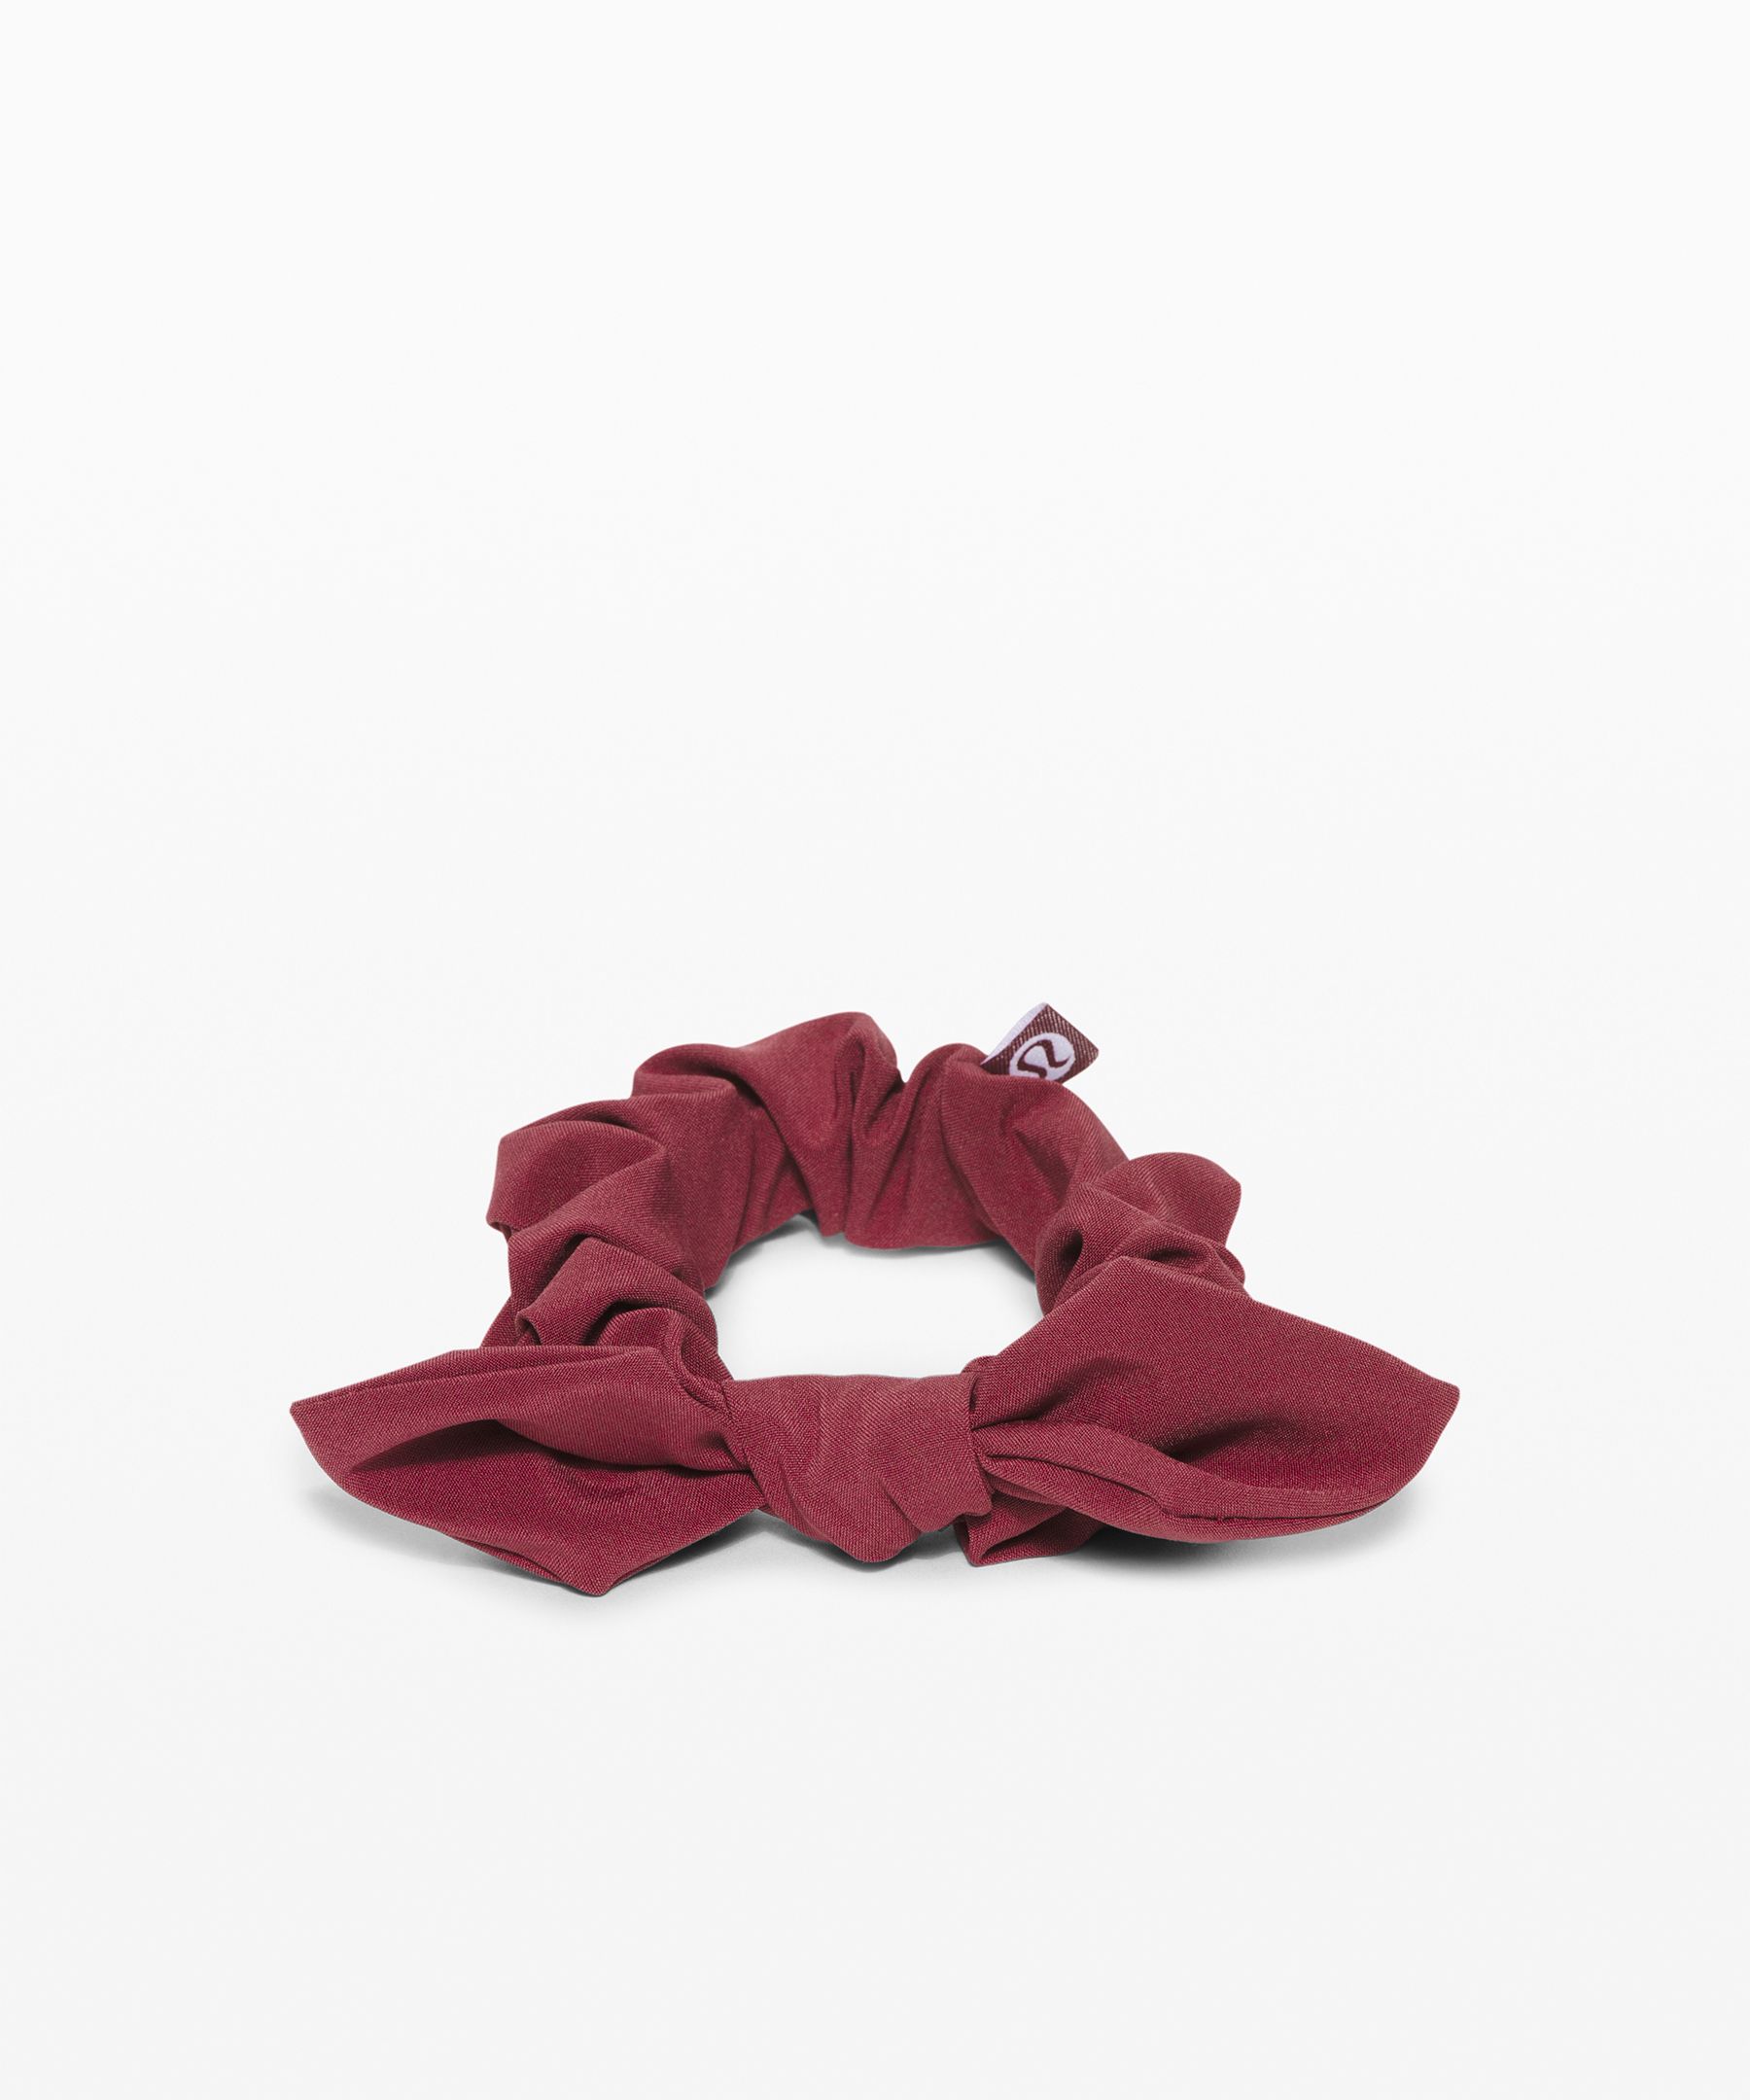 Lululemon Uplifting Scrunchie *bow In Red